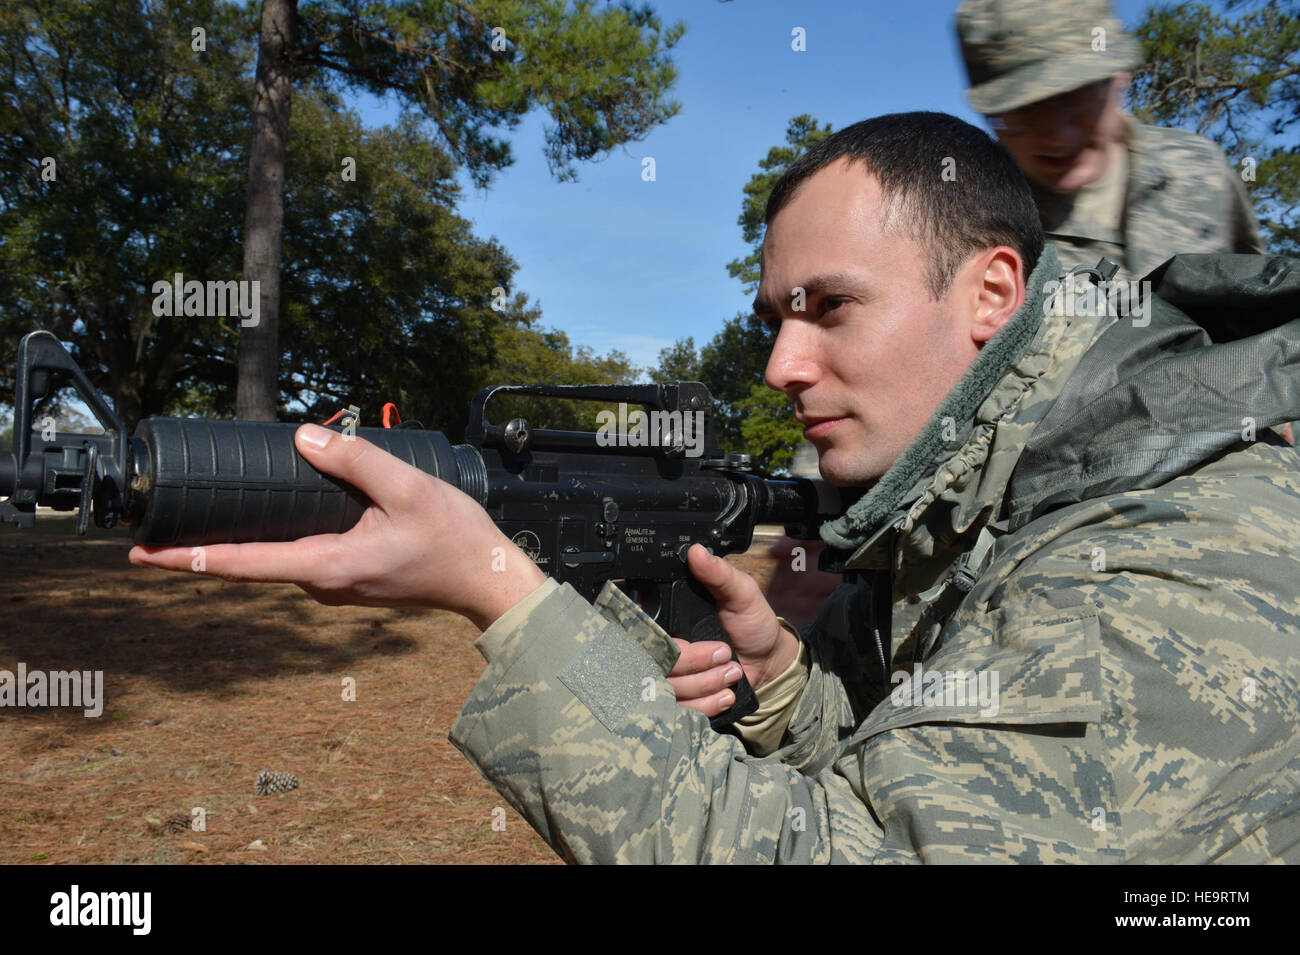 U.S. Air Force Tech. Sgt. Jason Kilanski, 1st Combat Camera Squadron combat broadcaster, provides security for his team to cross over a road during Exercise Scorpion Lens 15, Joint Base Charleston, S.C., Feb. 4, 2015. Exercise Scorpion Lens 2015 is an annual exercise designed to validate the ability of Air Force Combat Camera Airmen to survive, operate, and provide directed imagery capability in an austere environment including in the presence of chemical, biological, radiological, and nuclear contamination. Combat Camera Airmen document a full range of military operations in support of senior Stock Photo